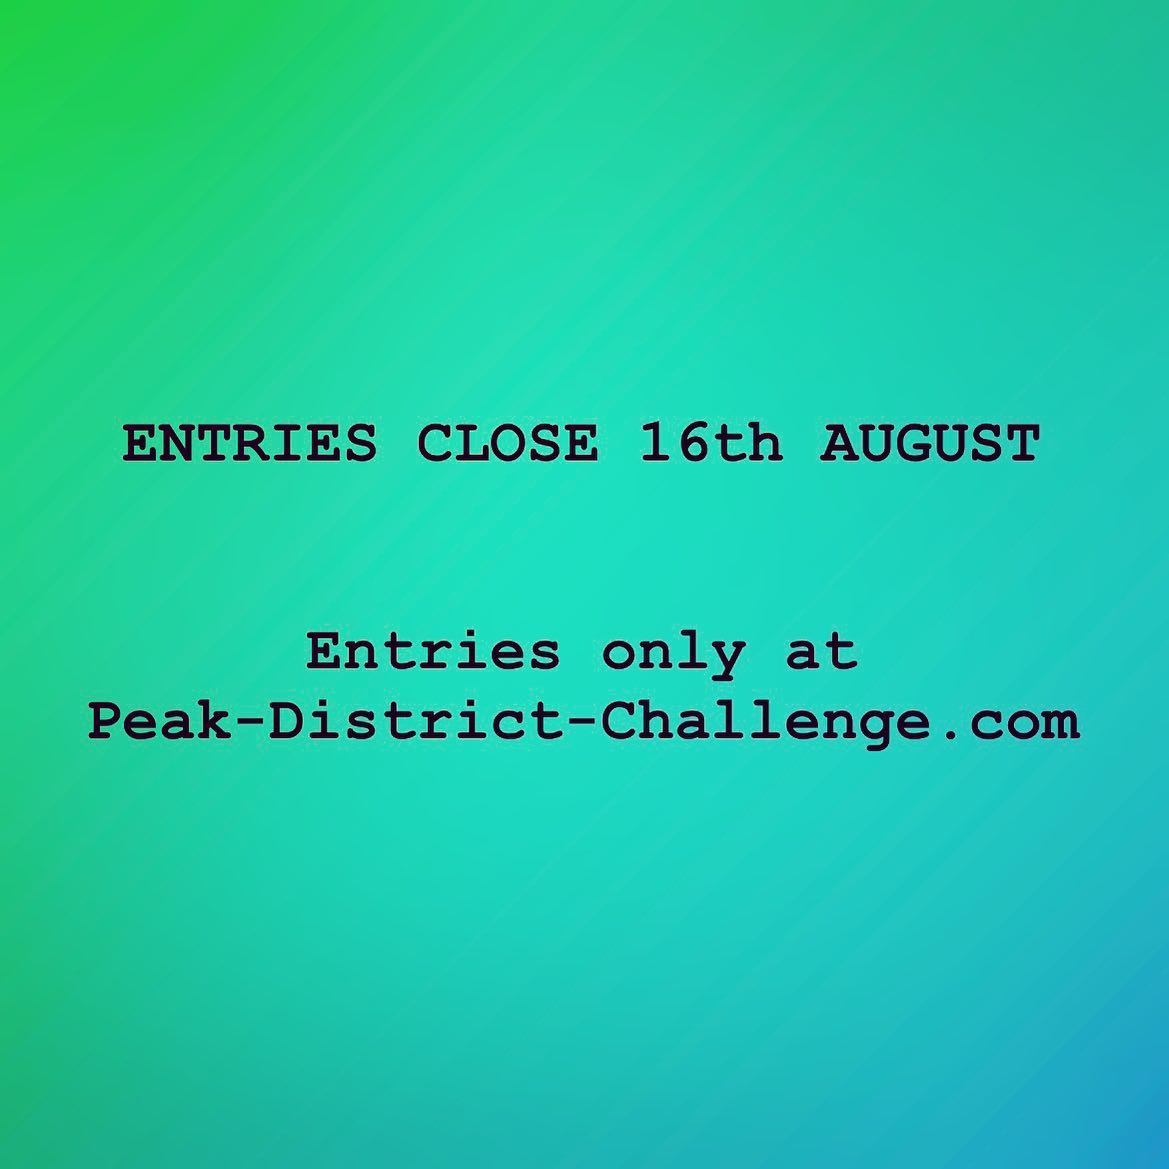 Peak District Challenge entries close on 16 August. Sign up now to take part in distances from 10...